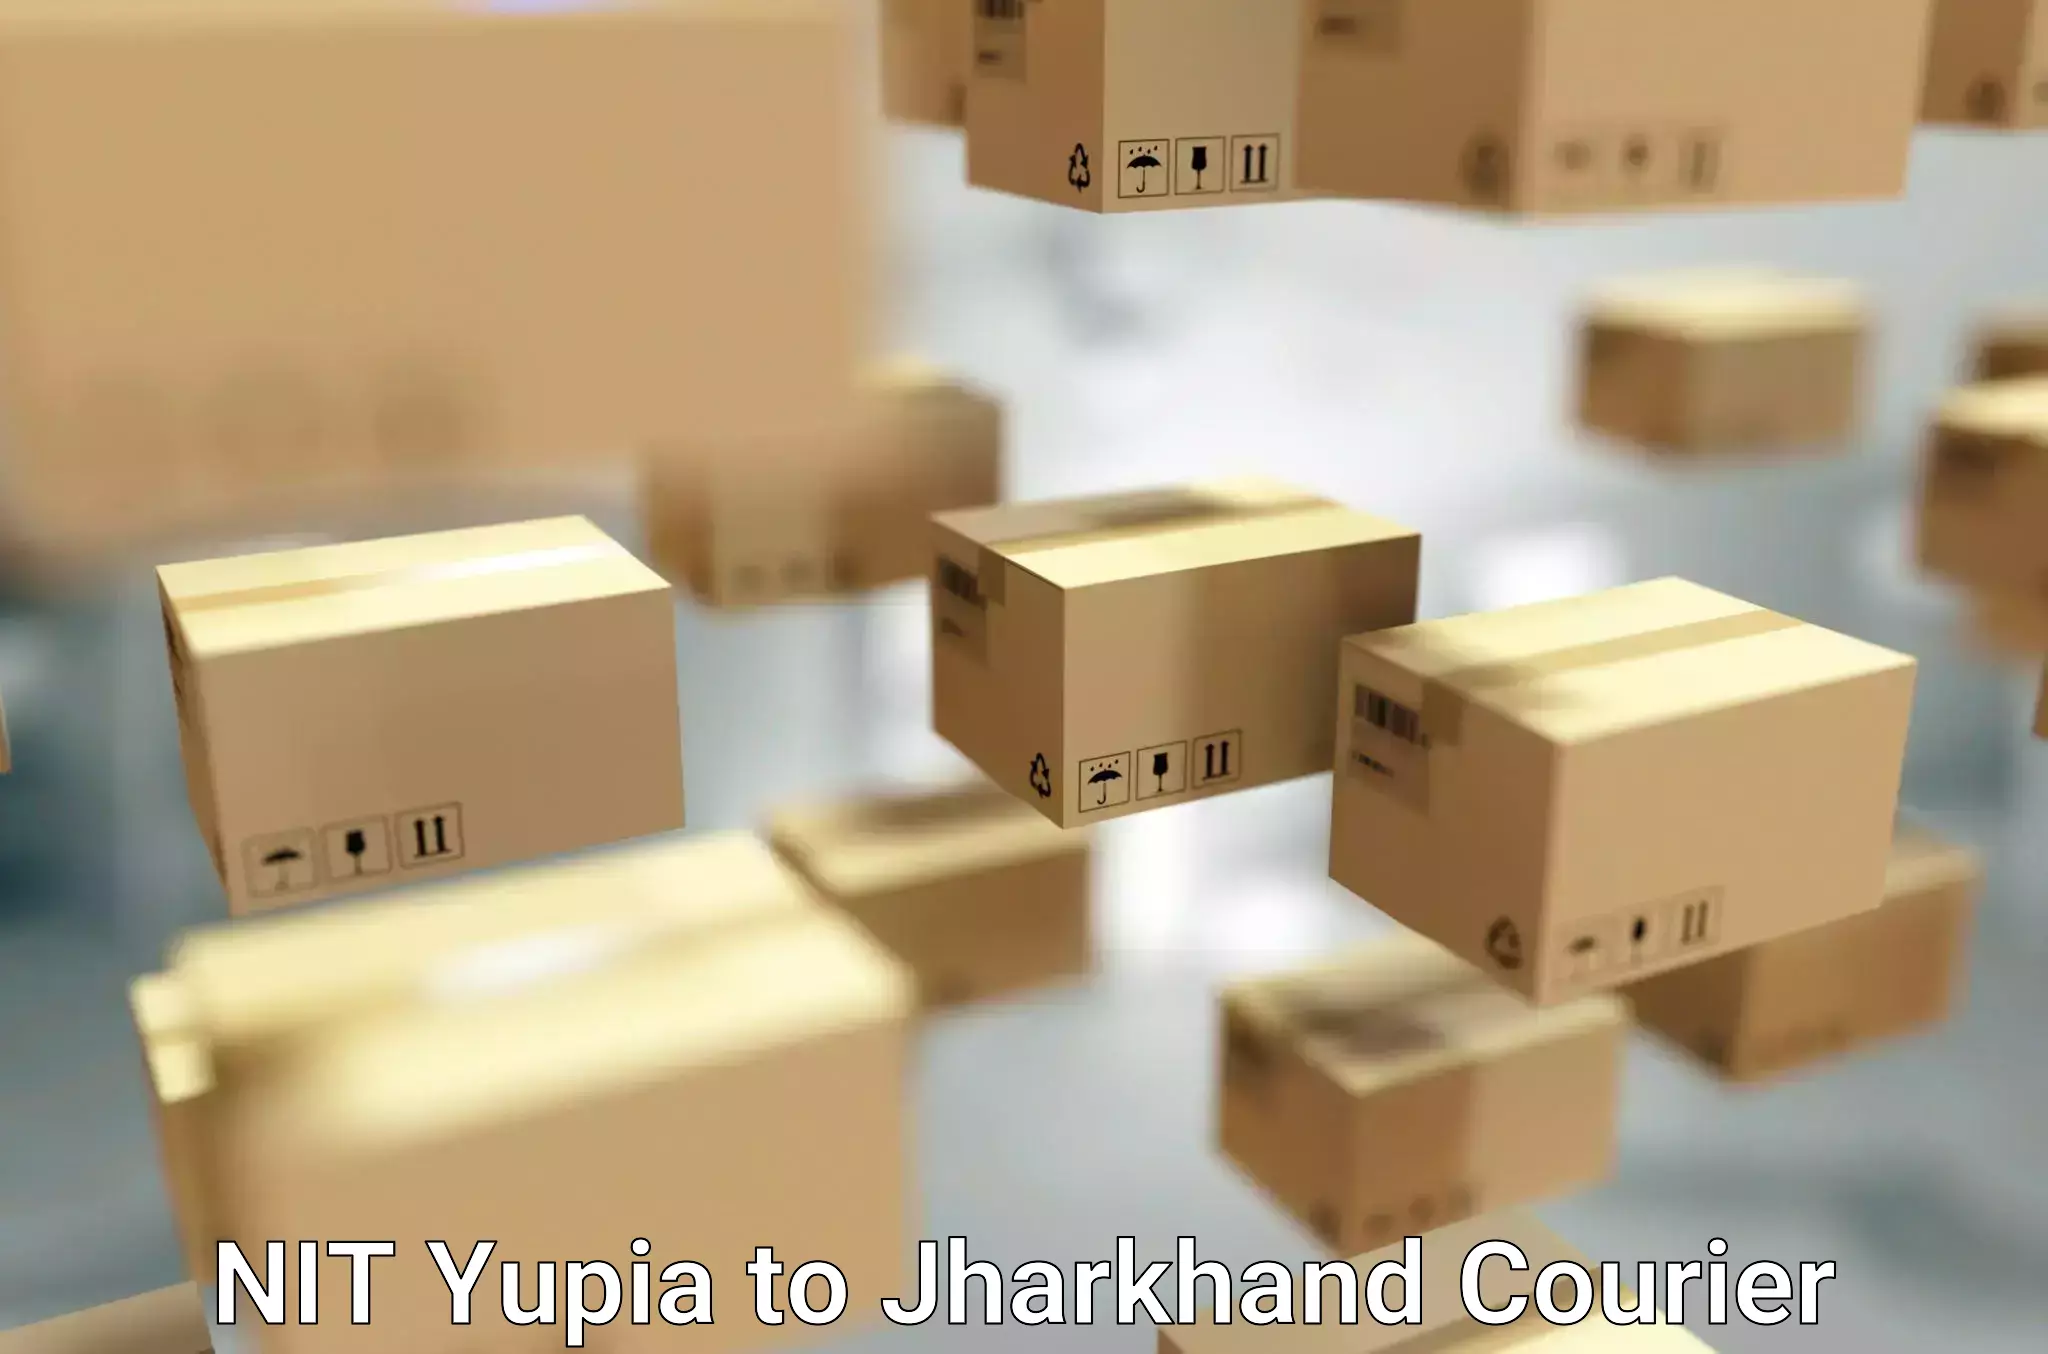 Furniture shipping services NIT Yupia to Jamshedpur